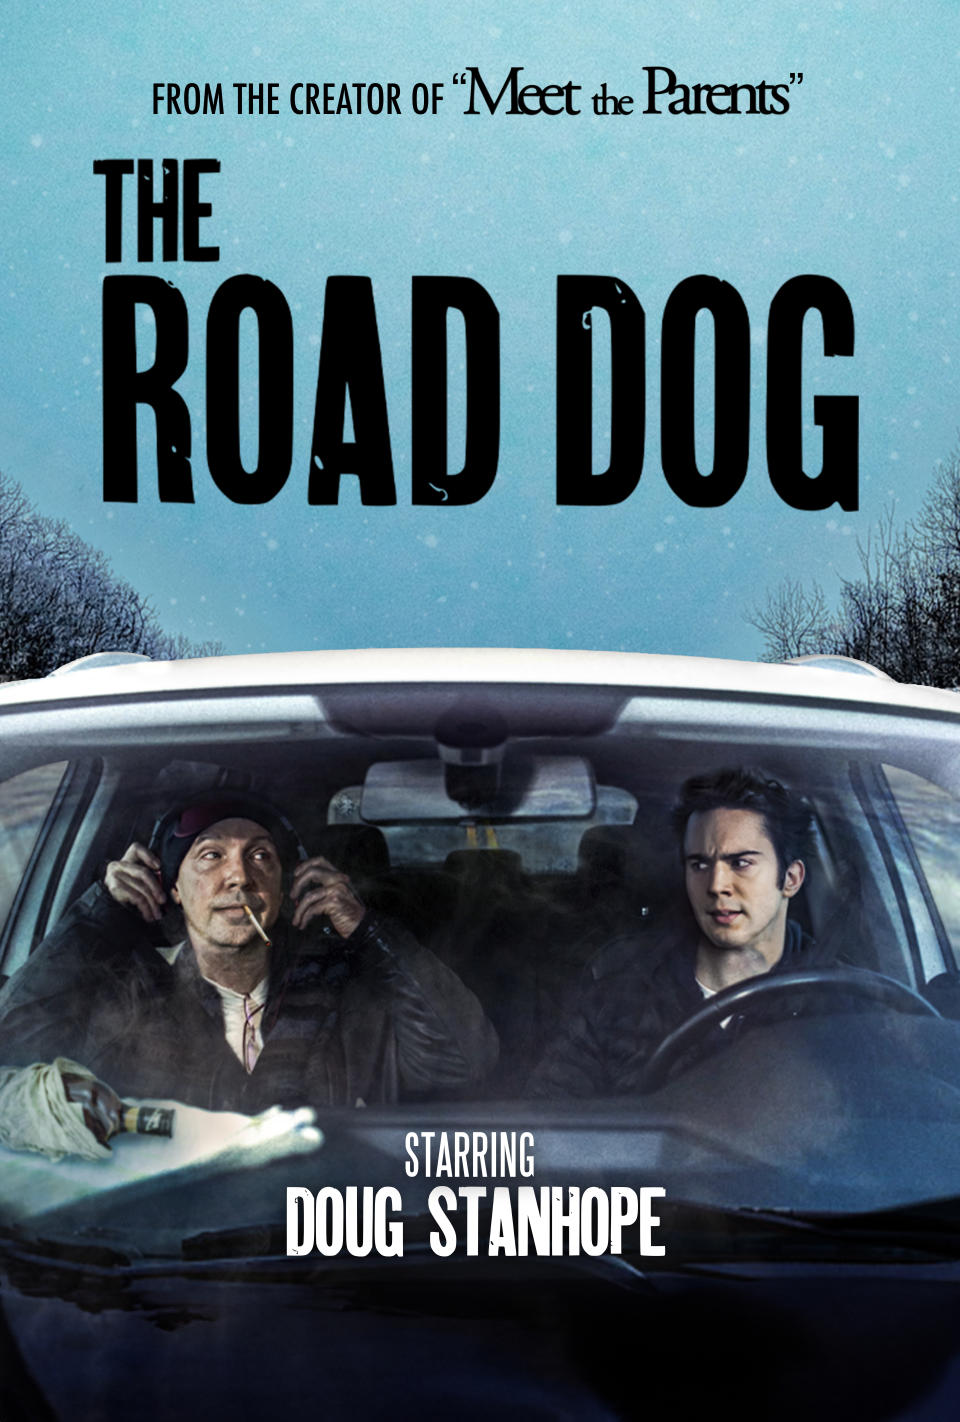 Poster for 'The Road Dog' movie out via Freestyle Digital this fall